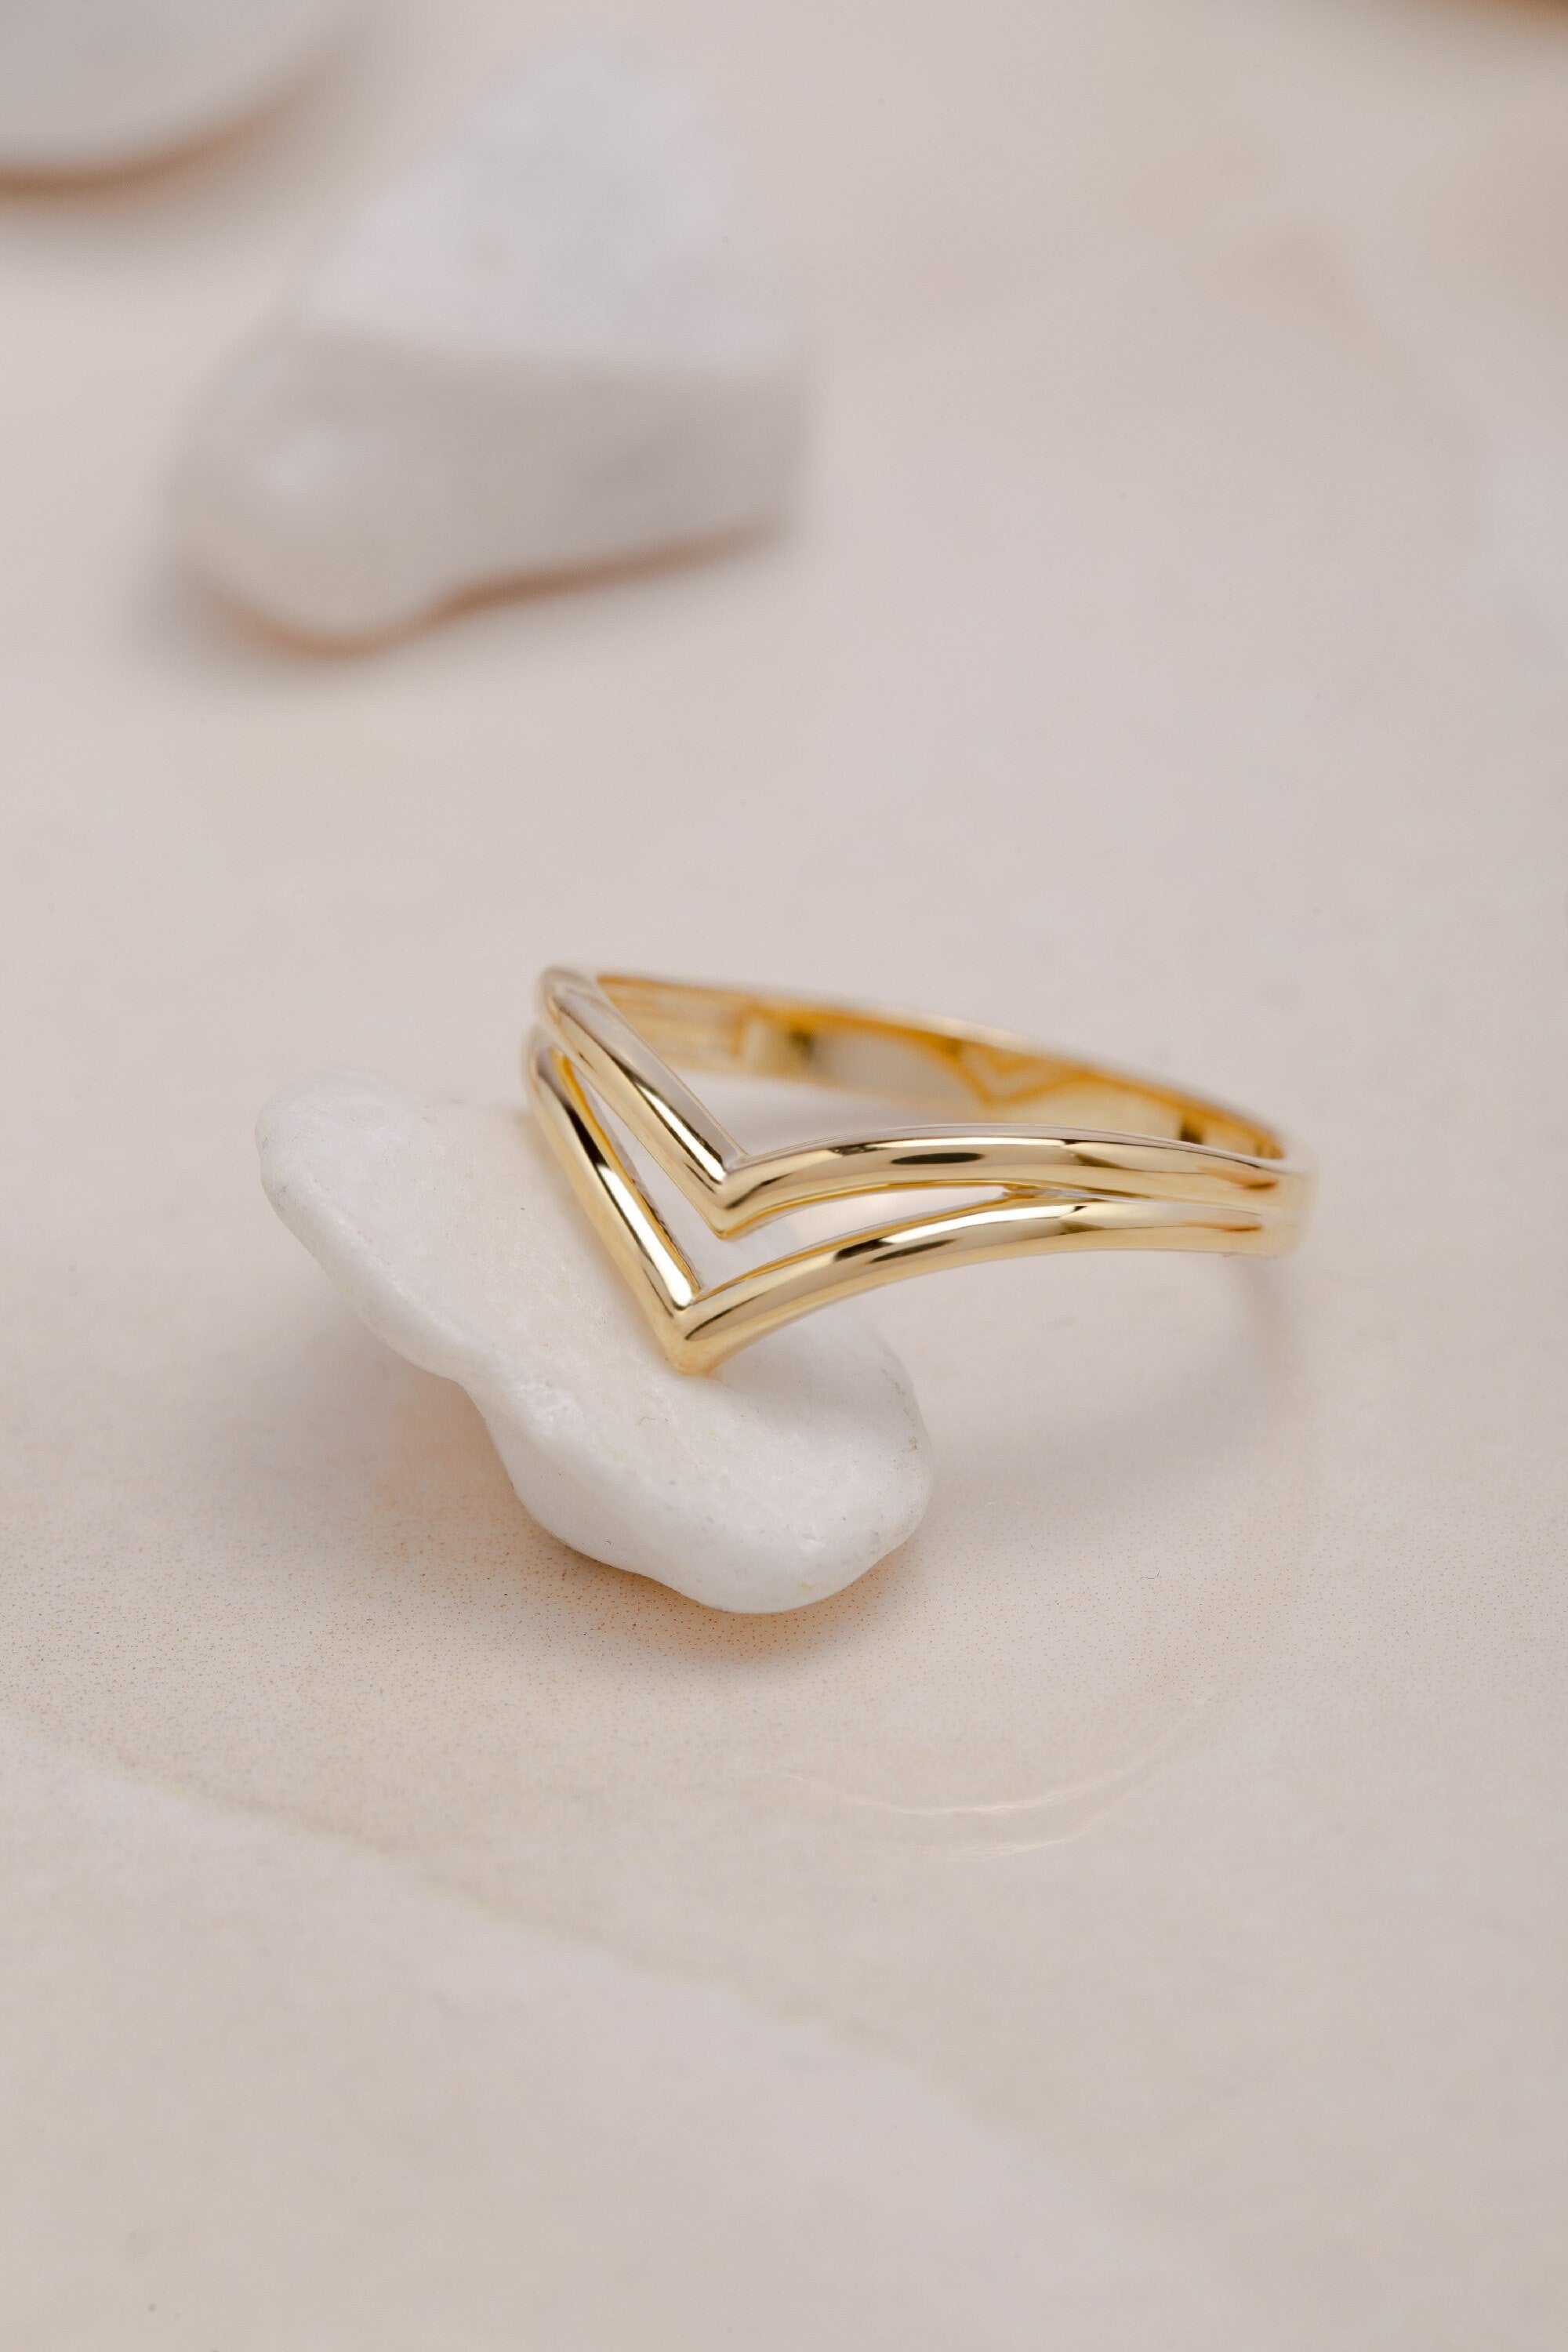 10K V Shape Ring, Yellow Gold Ring, Curve Thumb Ring, Chevron Ring, Stacking Ring, White Gold Promise Ring, Gift For Mother Day